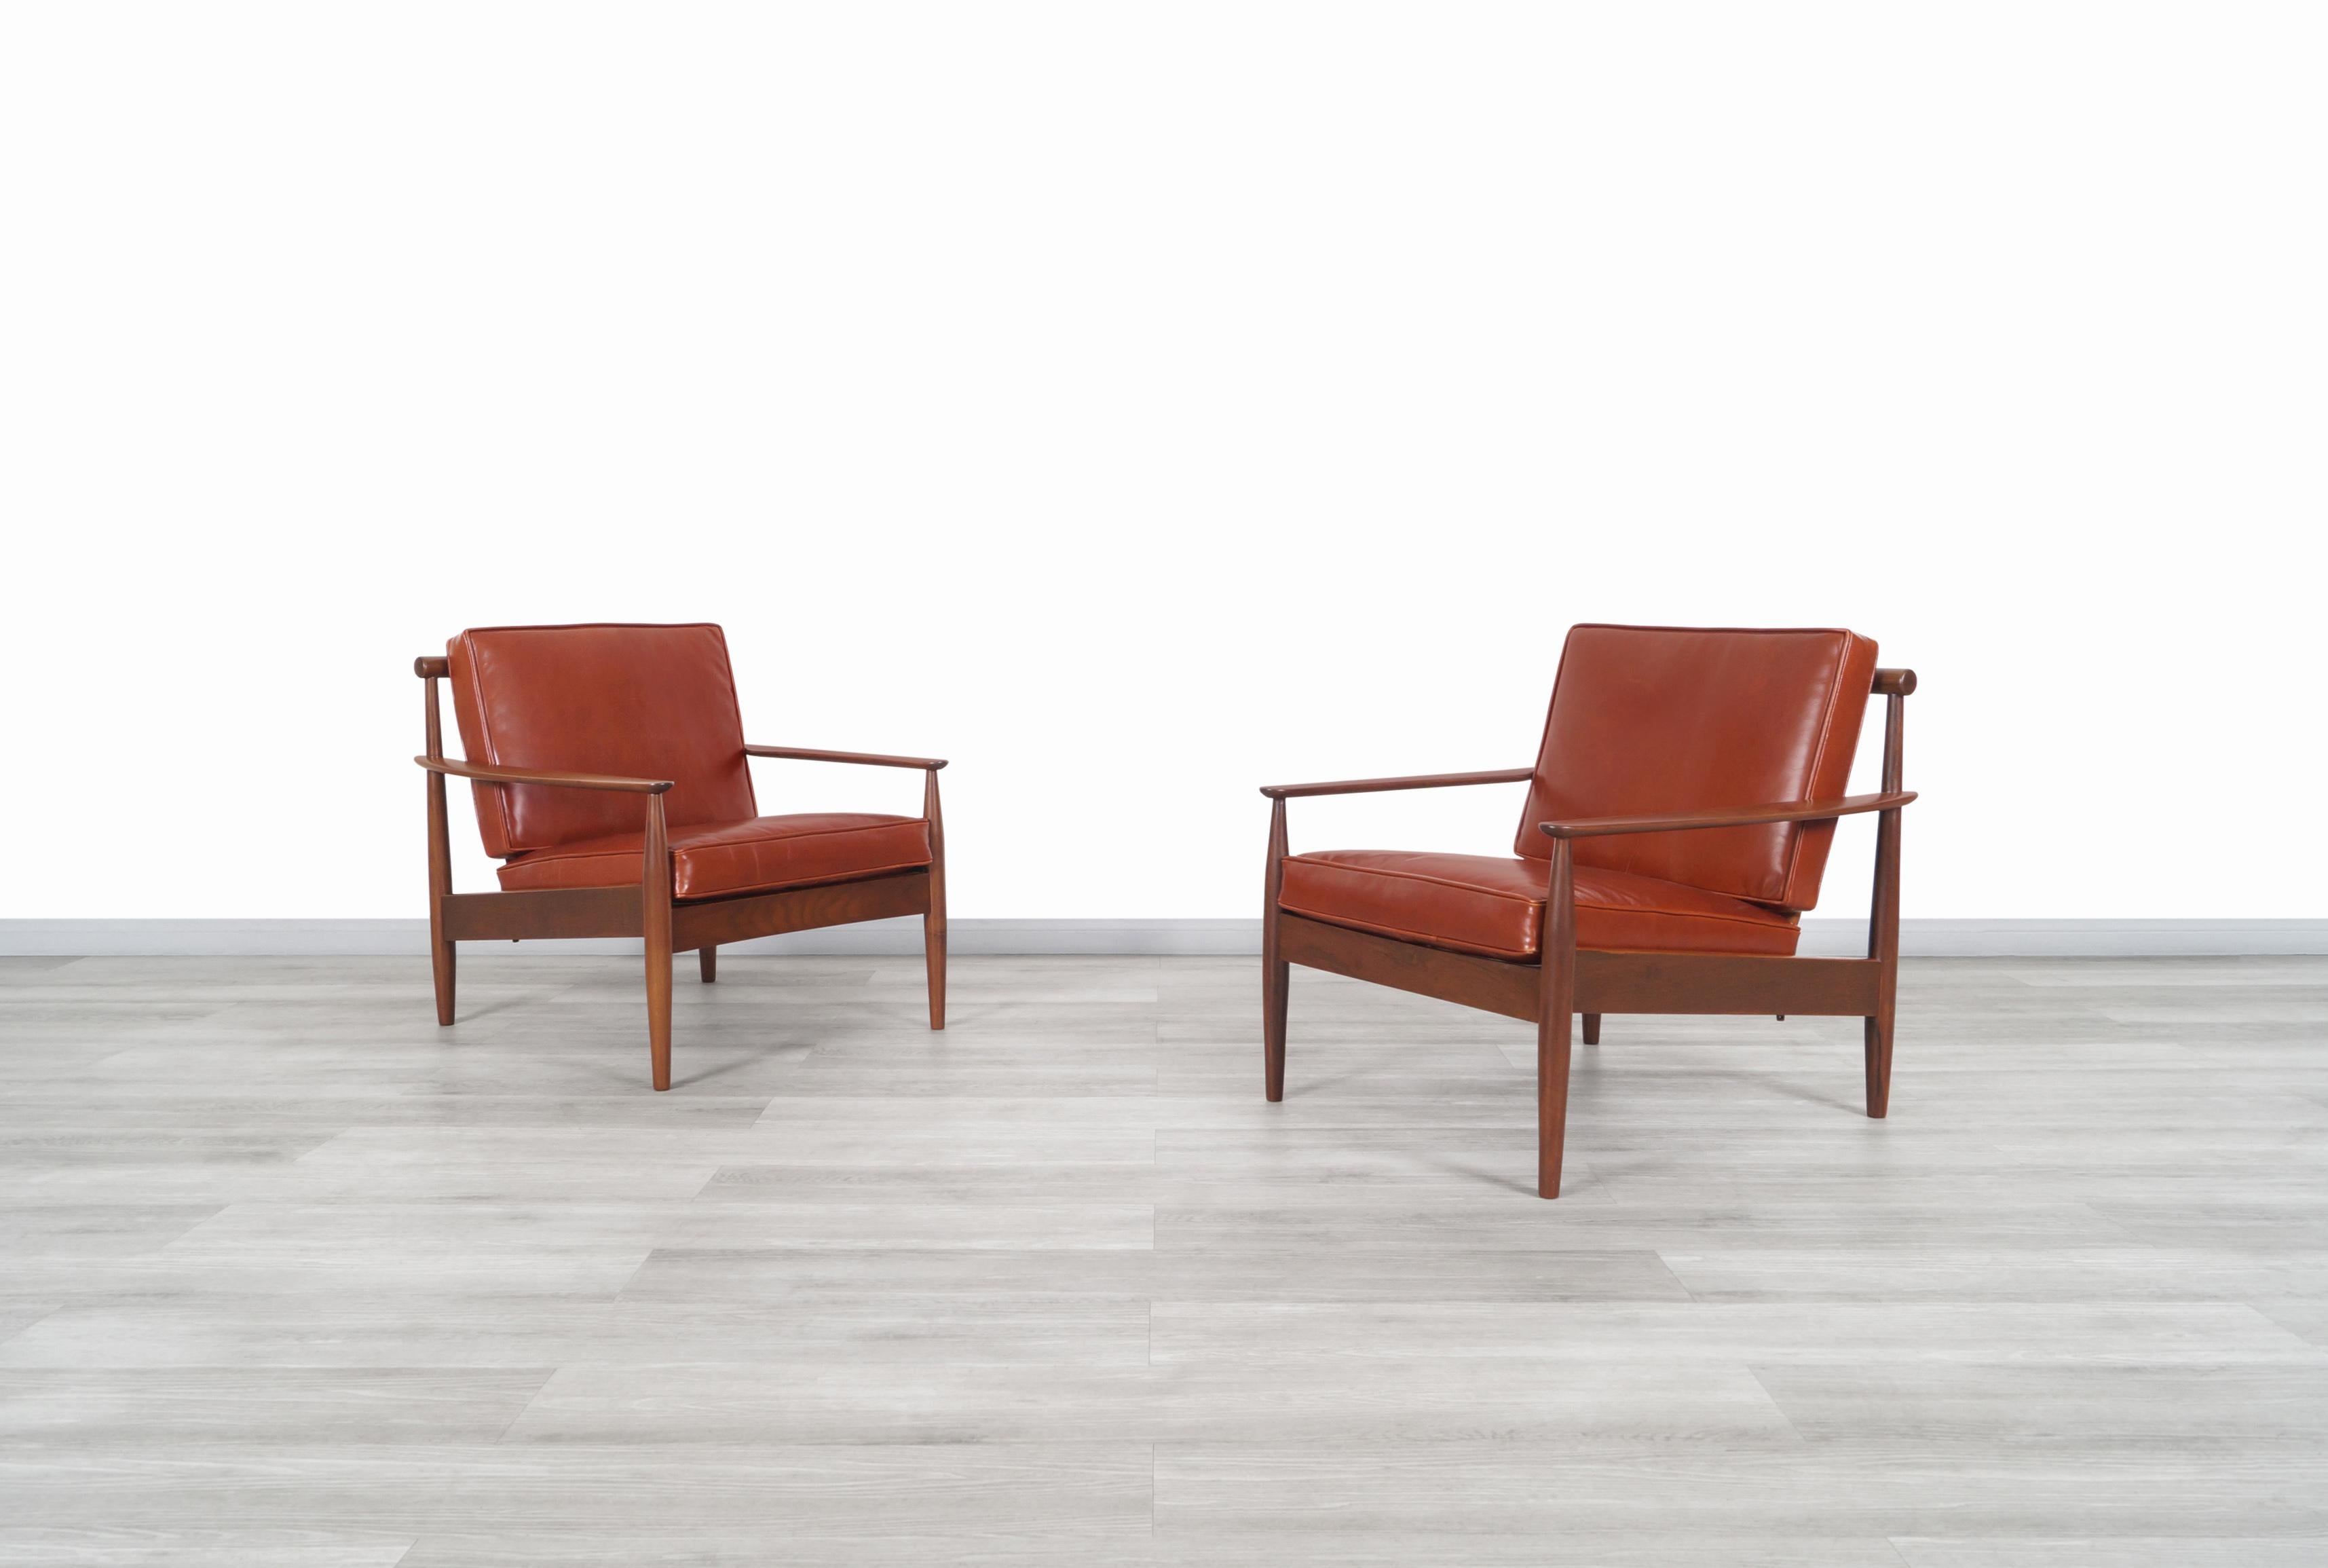 Exceptional Danish modern leather and walnut lounge chairs designed by Hans C. Andersen in Denmark and imported by Gunnar Schwartz, circa 1960s. These rare chairs have a design that perfectly combines comfort and elegance in their structure. The